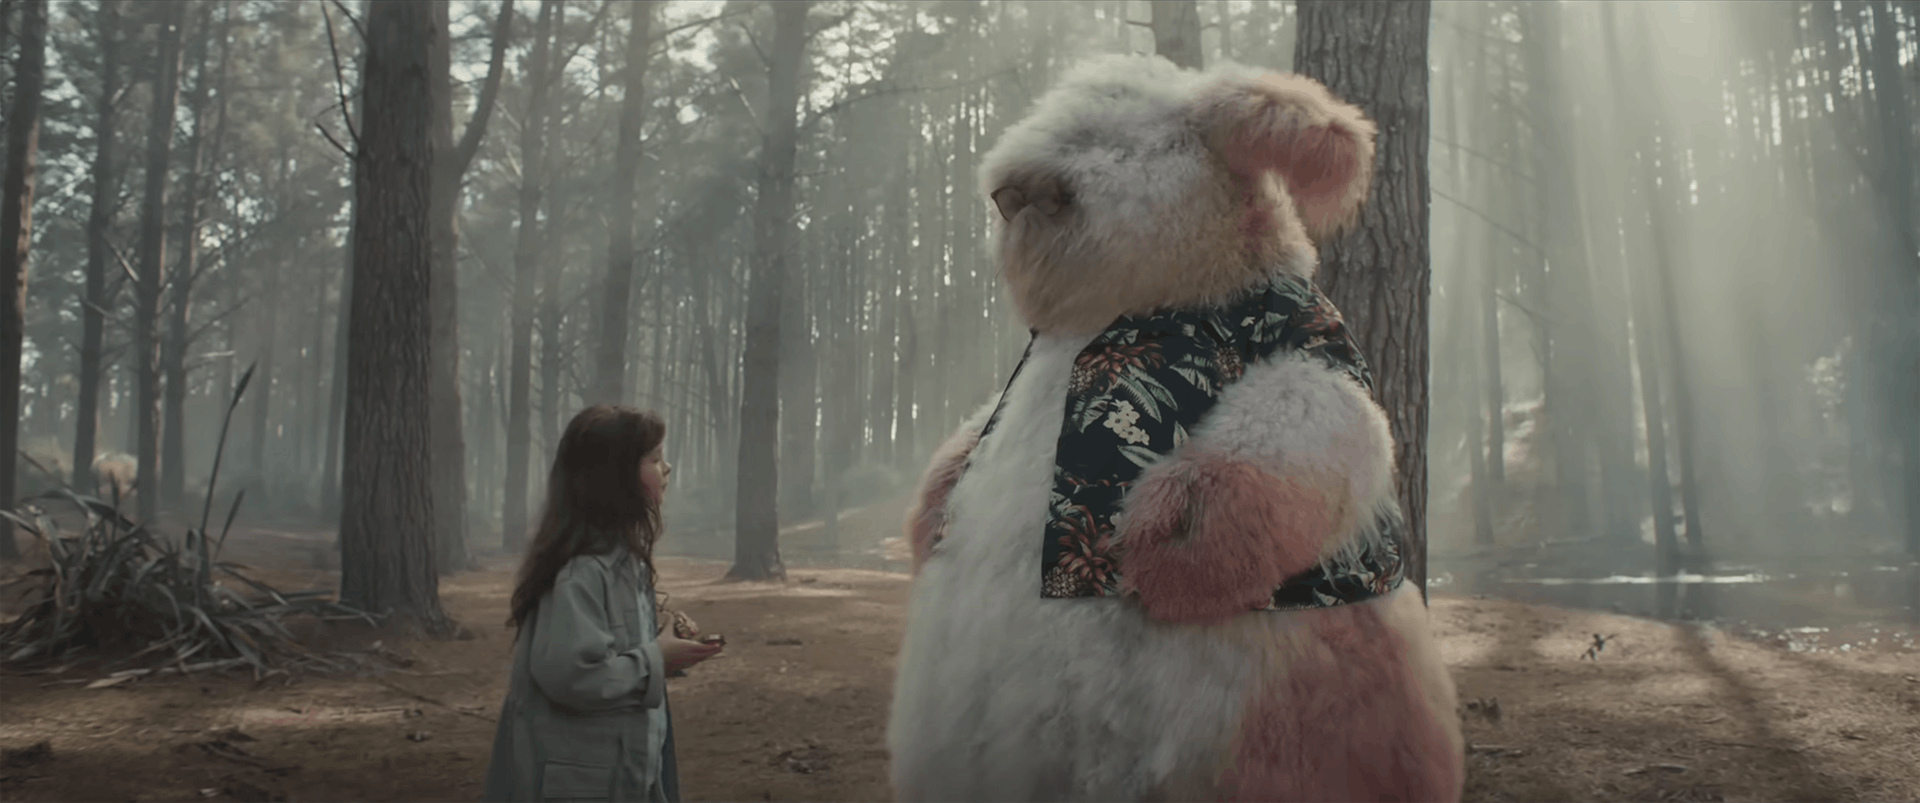 A young girl in a forest standing opposite a large furry creature